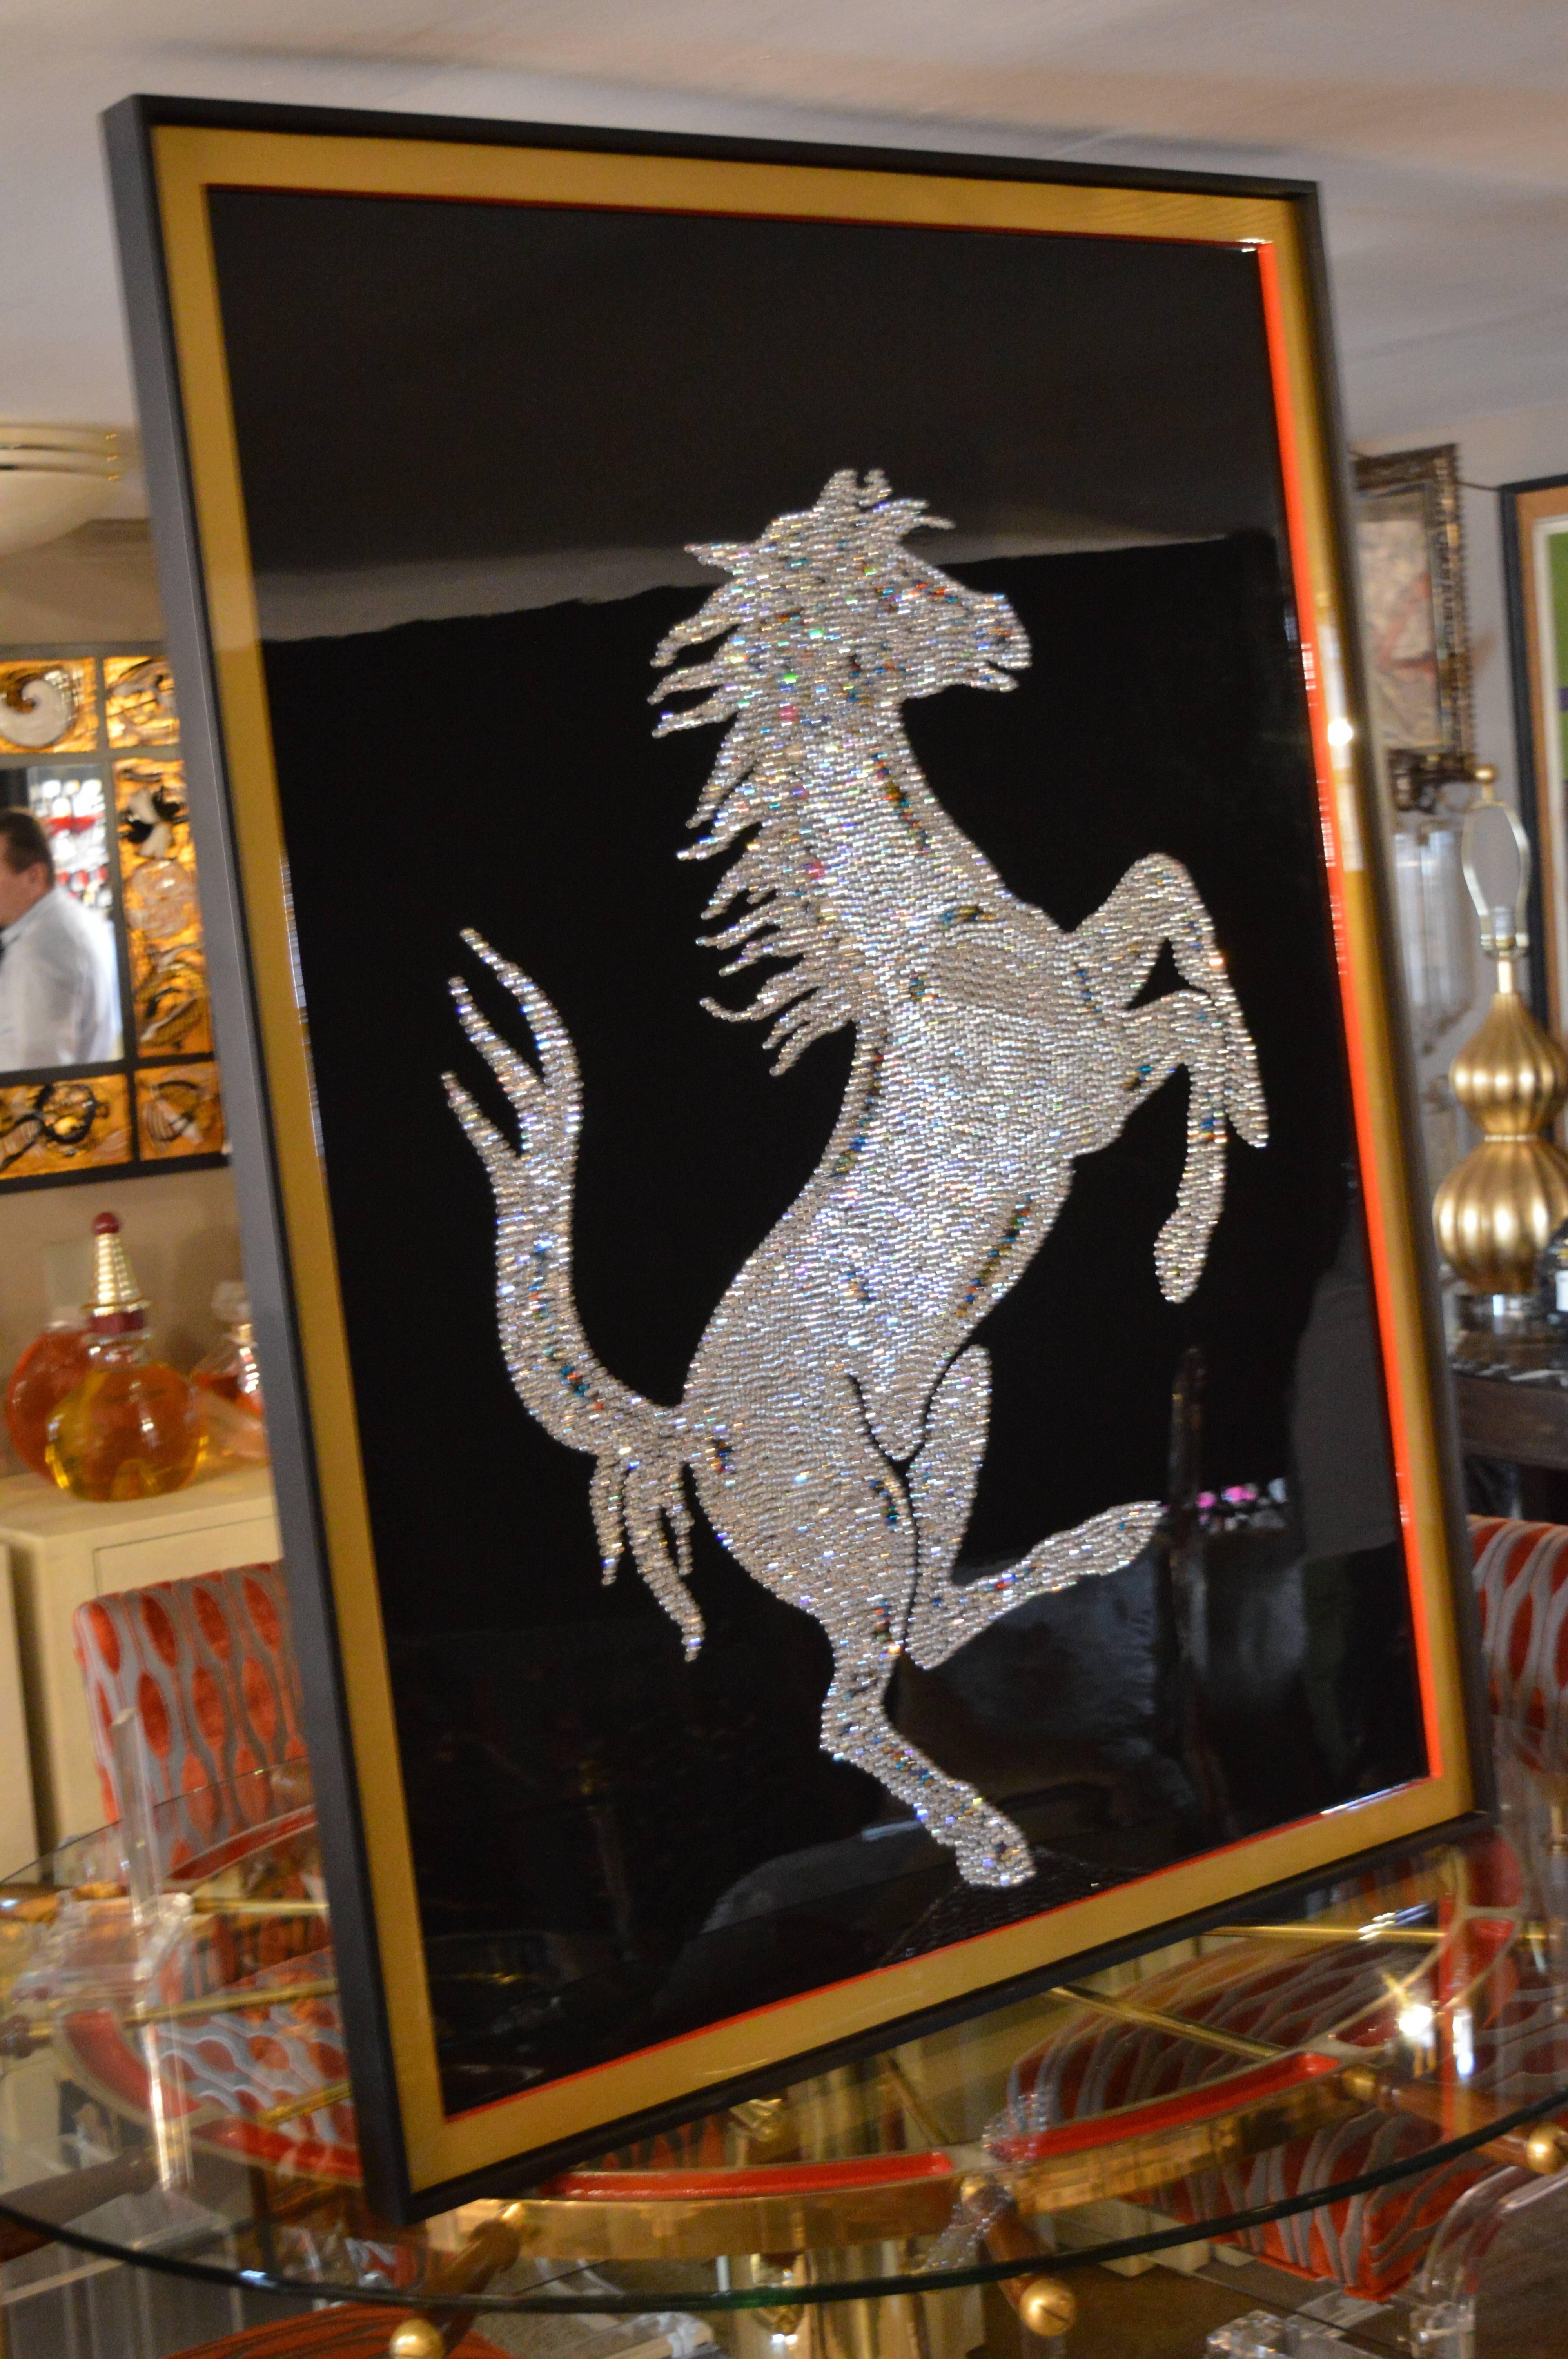 Each crystal is hand placed to replicate the horse of Ferrari, then covered in resin.